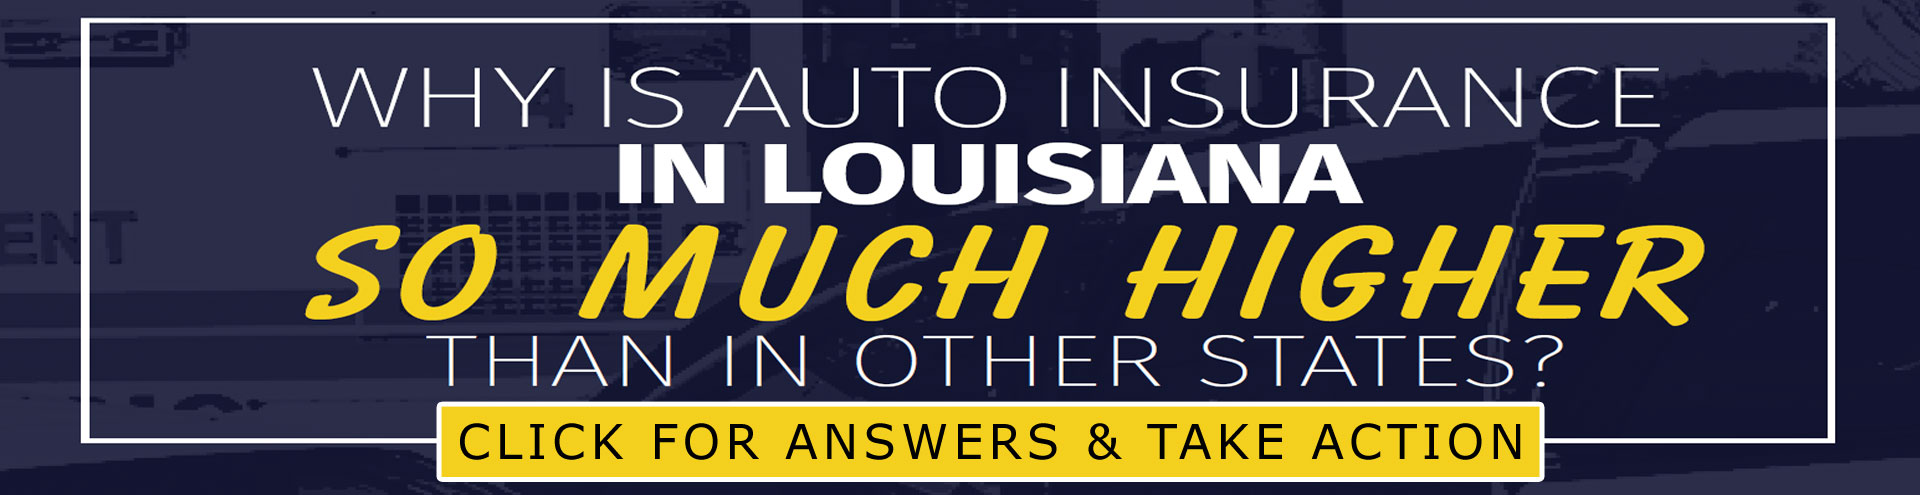 Why is auto insurance in Louisiana so much higher - Click to learn more